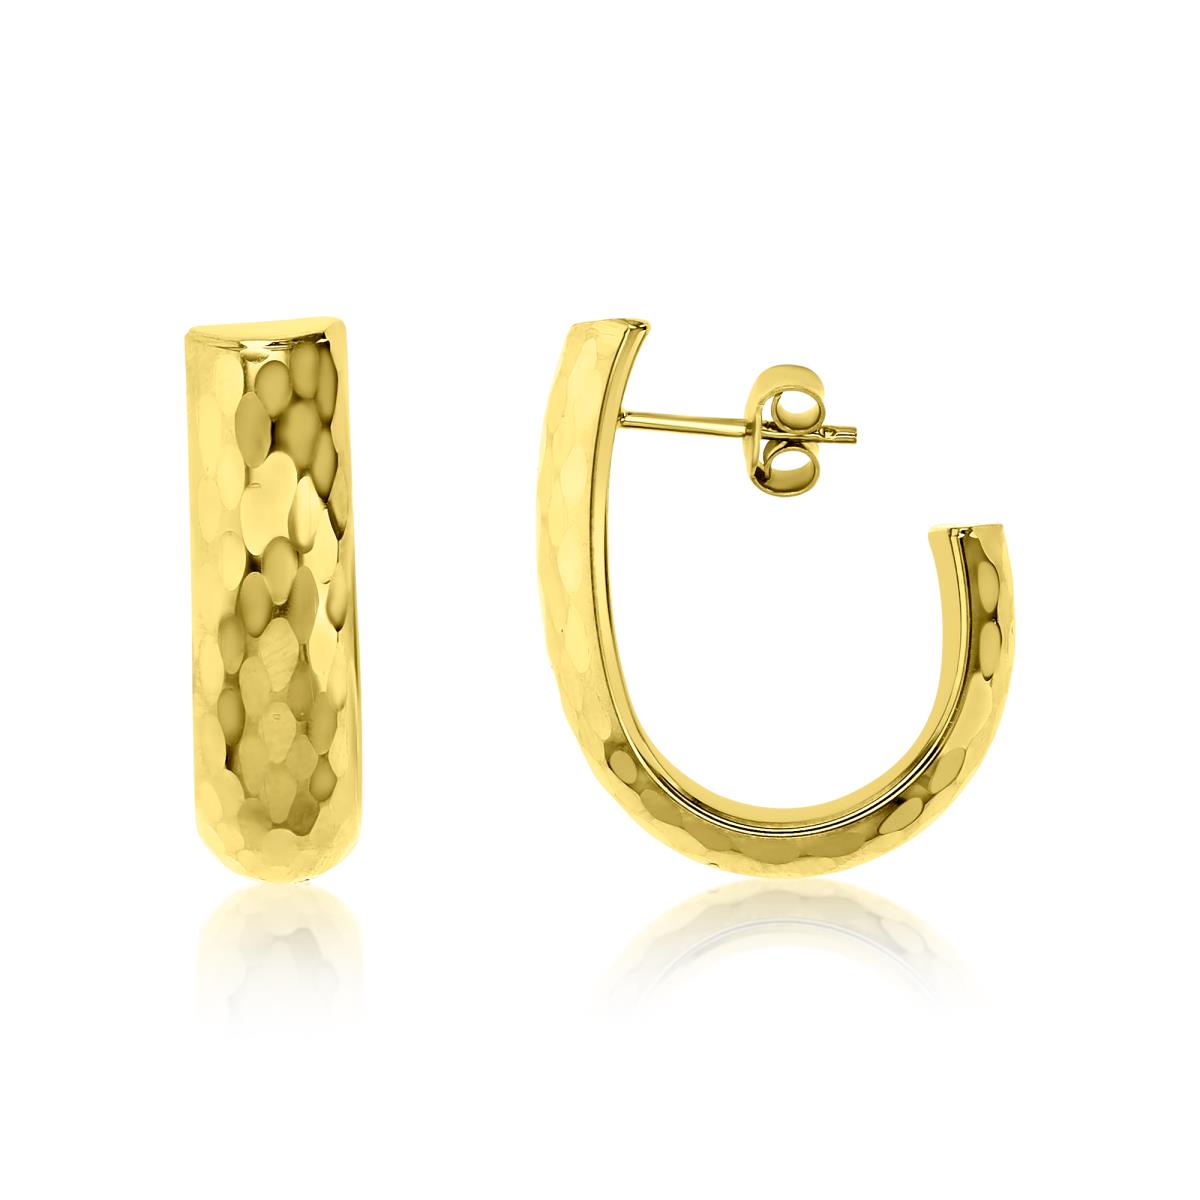 10K Gold Yellow 22X12 Hammered J Hoop Earring